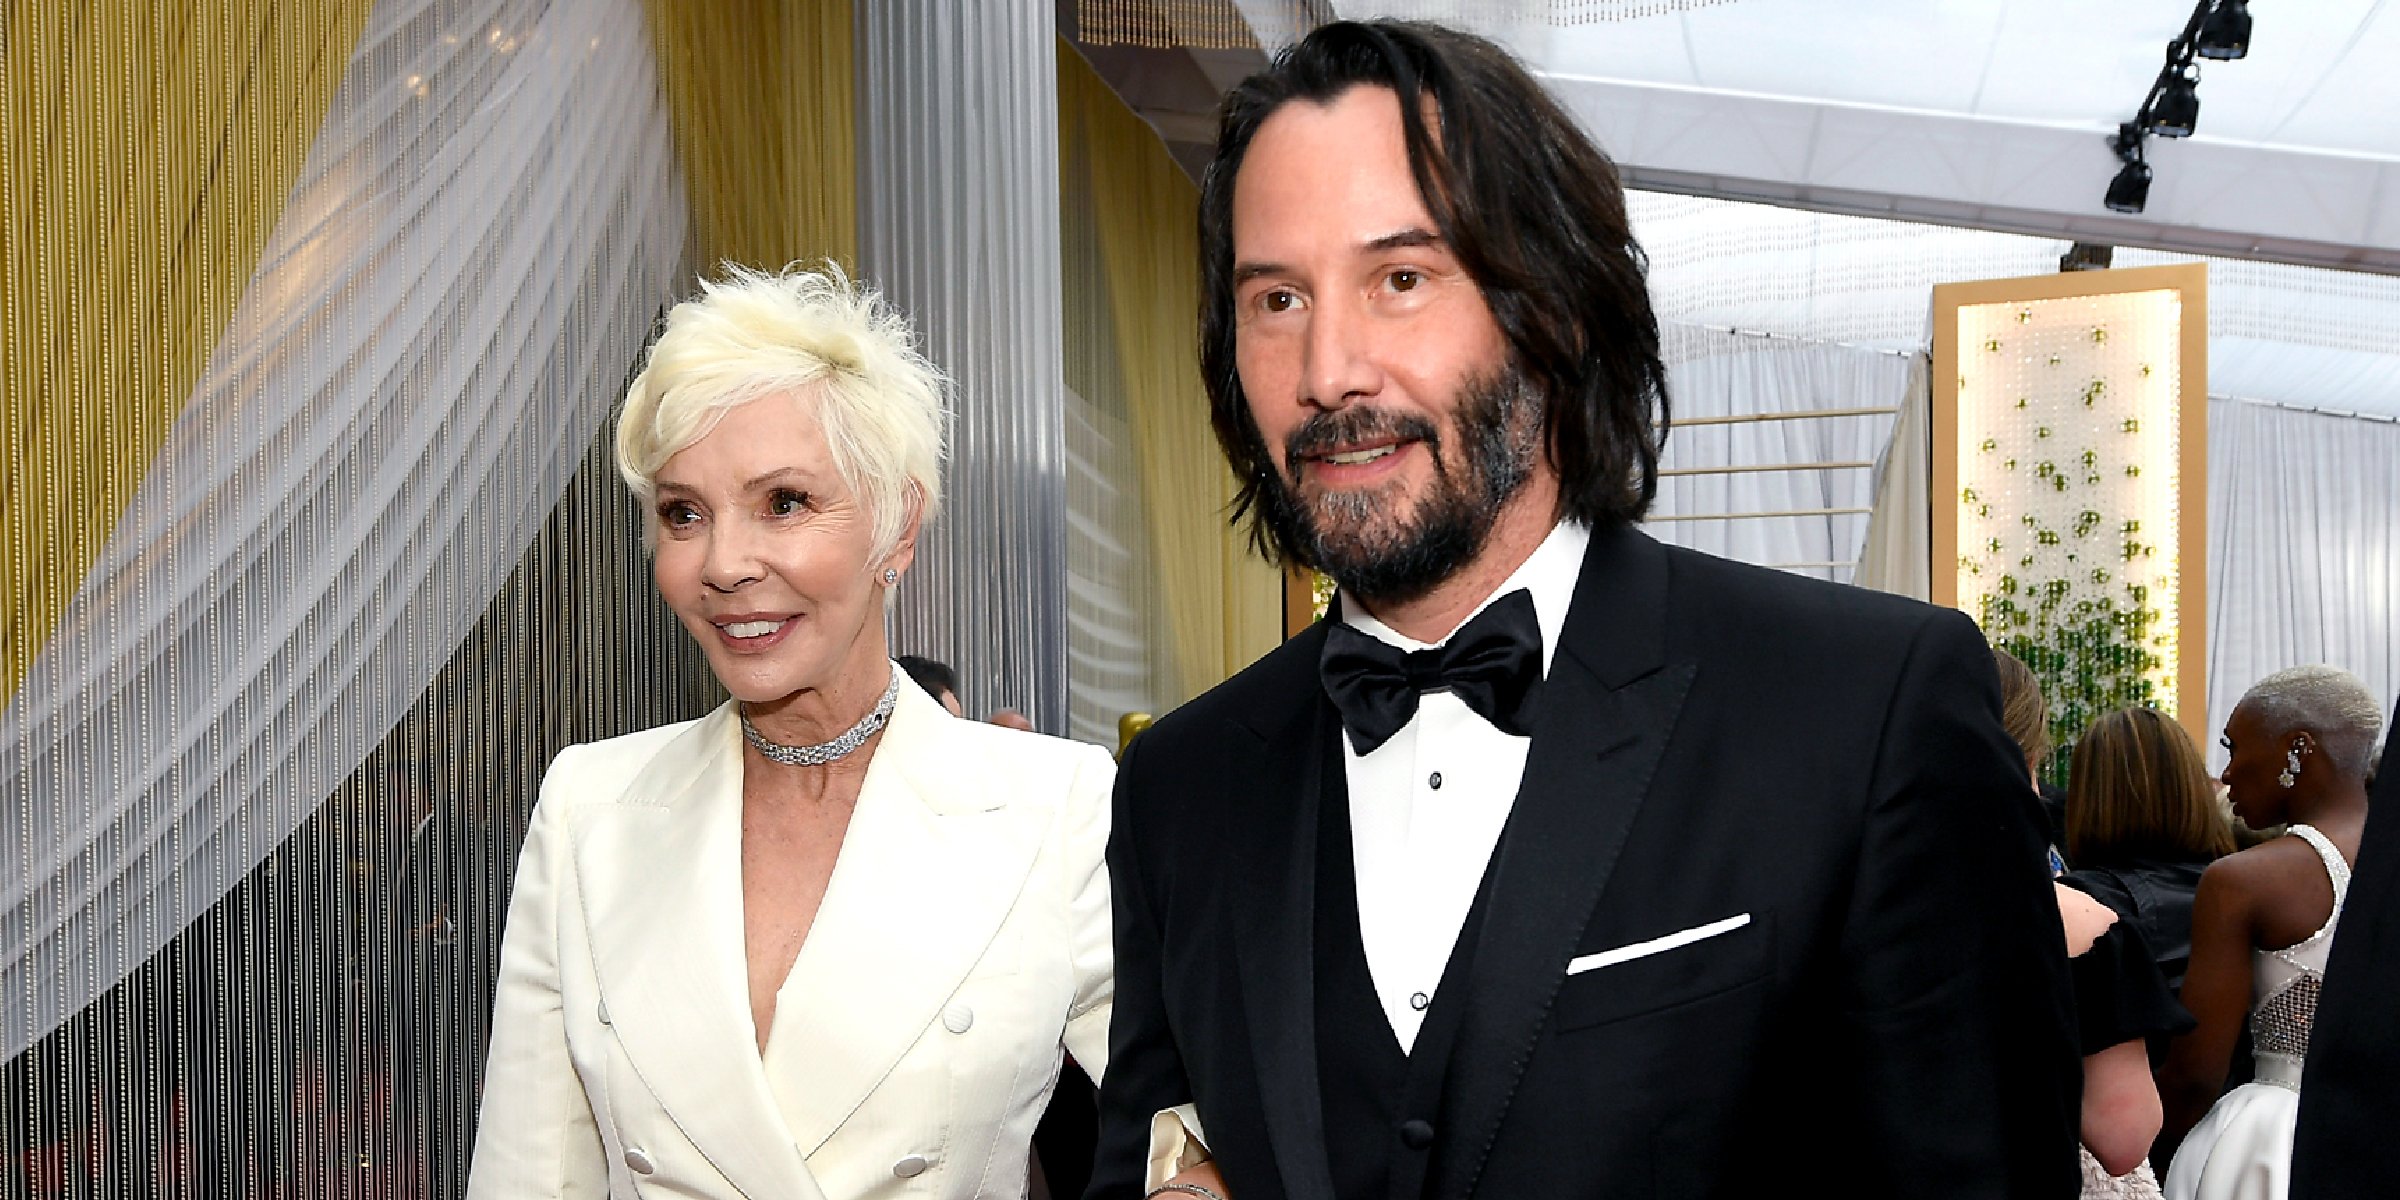 Patricia Taylor and Keanu Reeves in 2020. | Source: Getty images